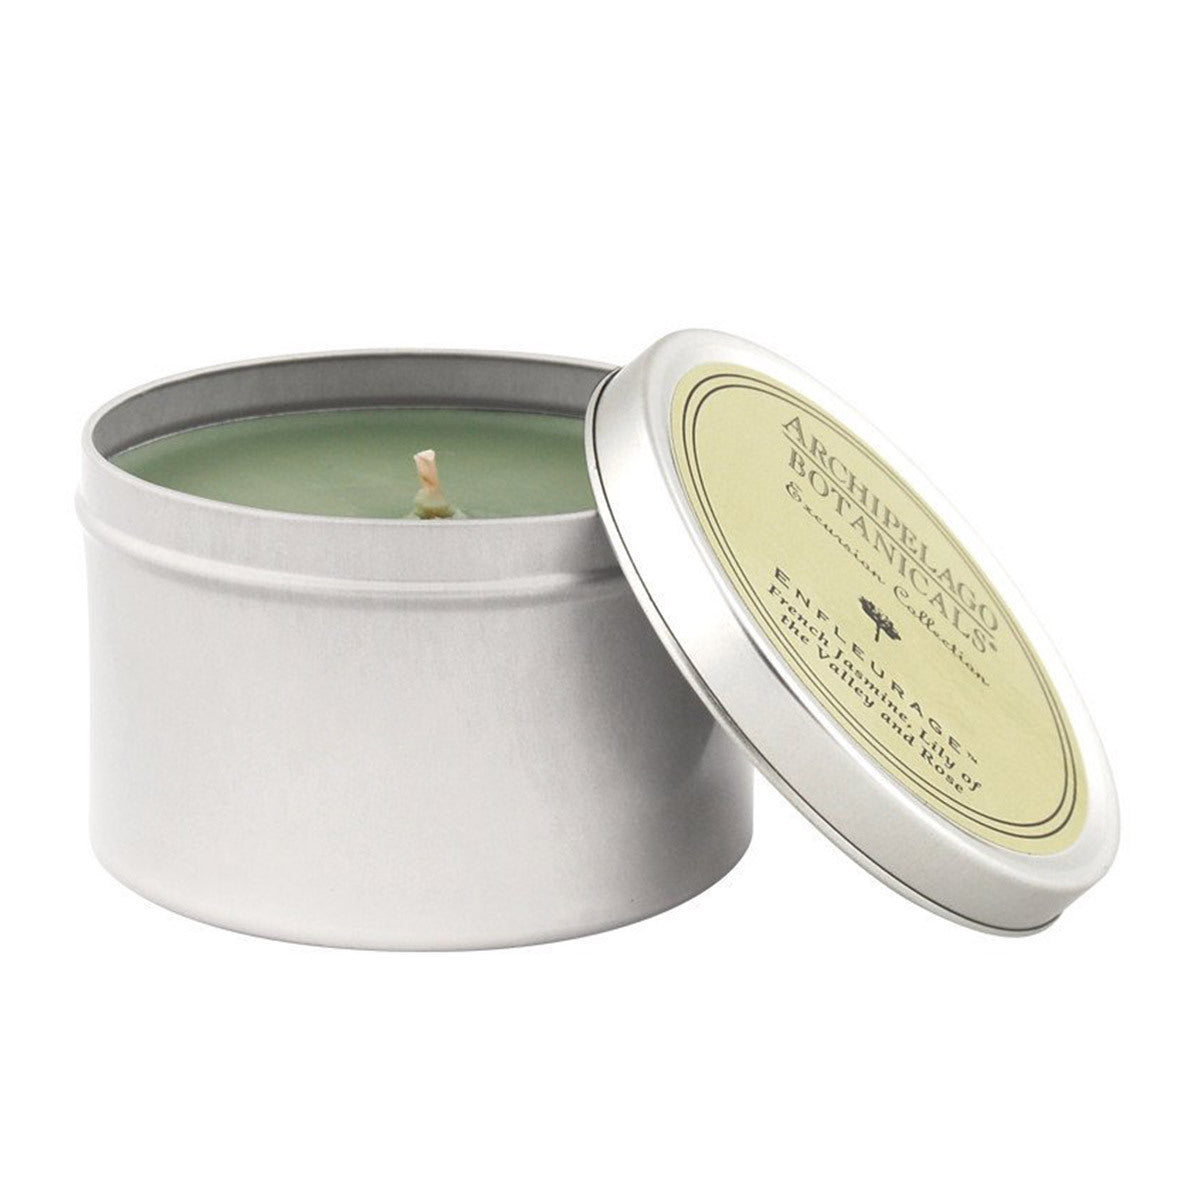 Primary image of Enfleurage Tin Candle